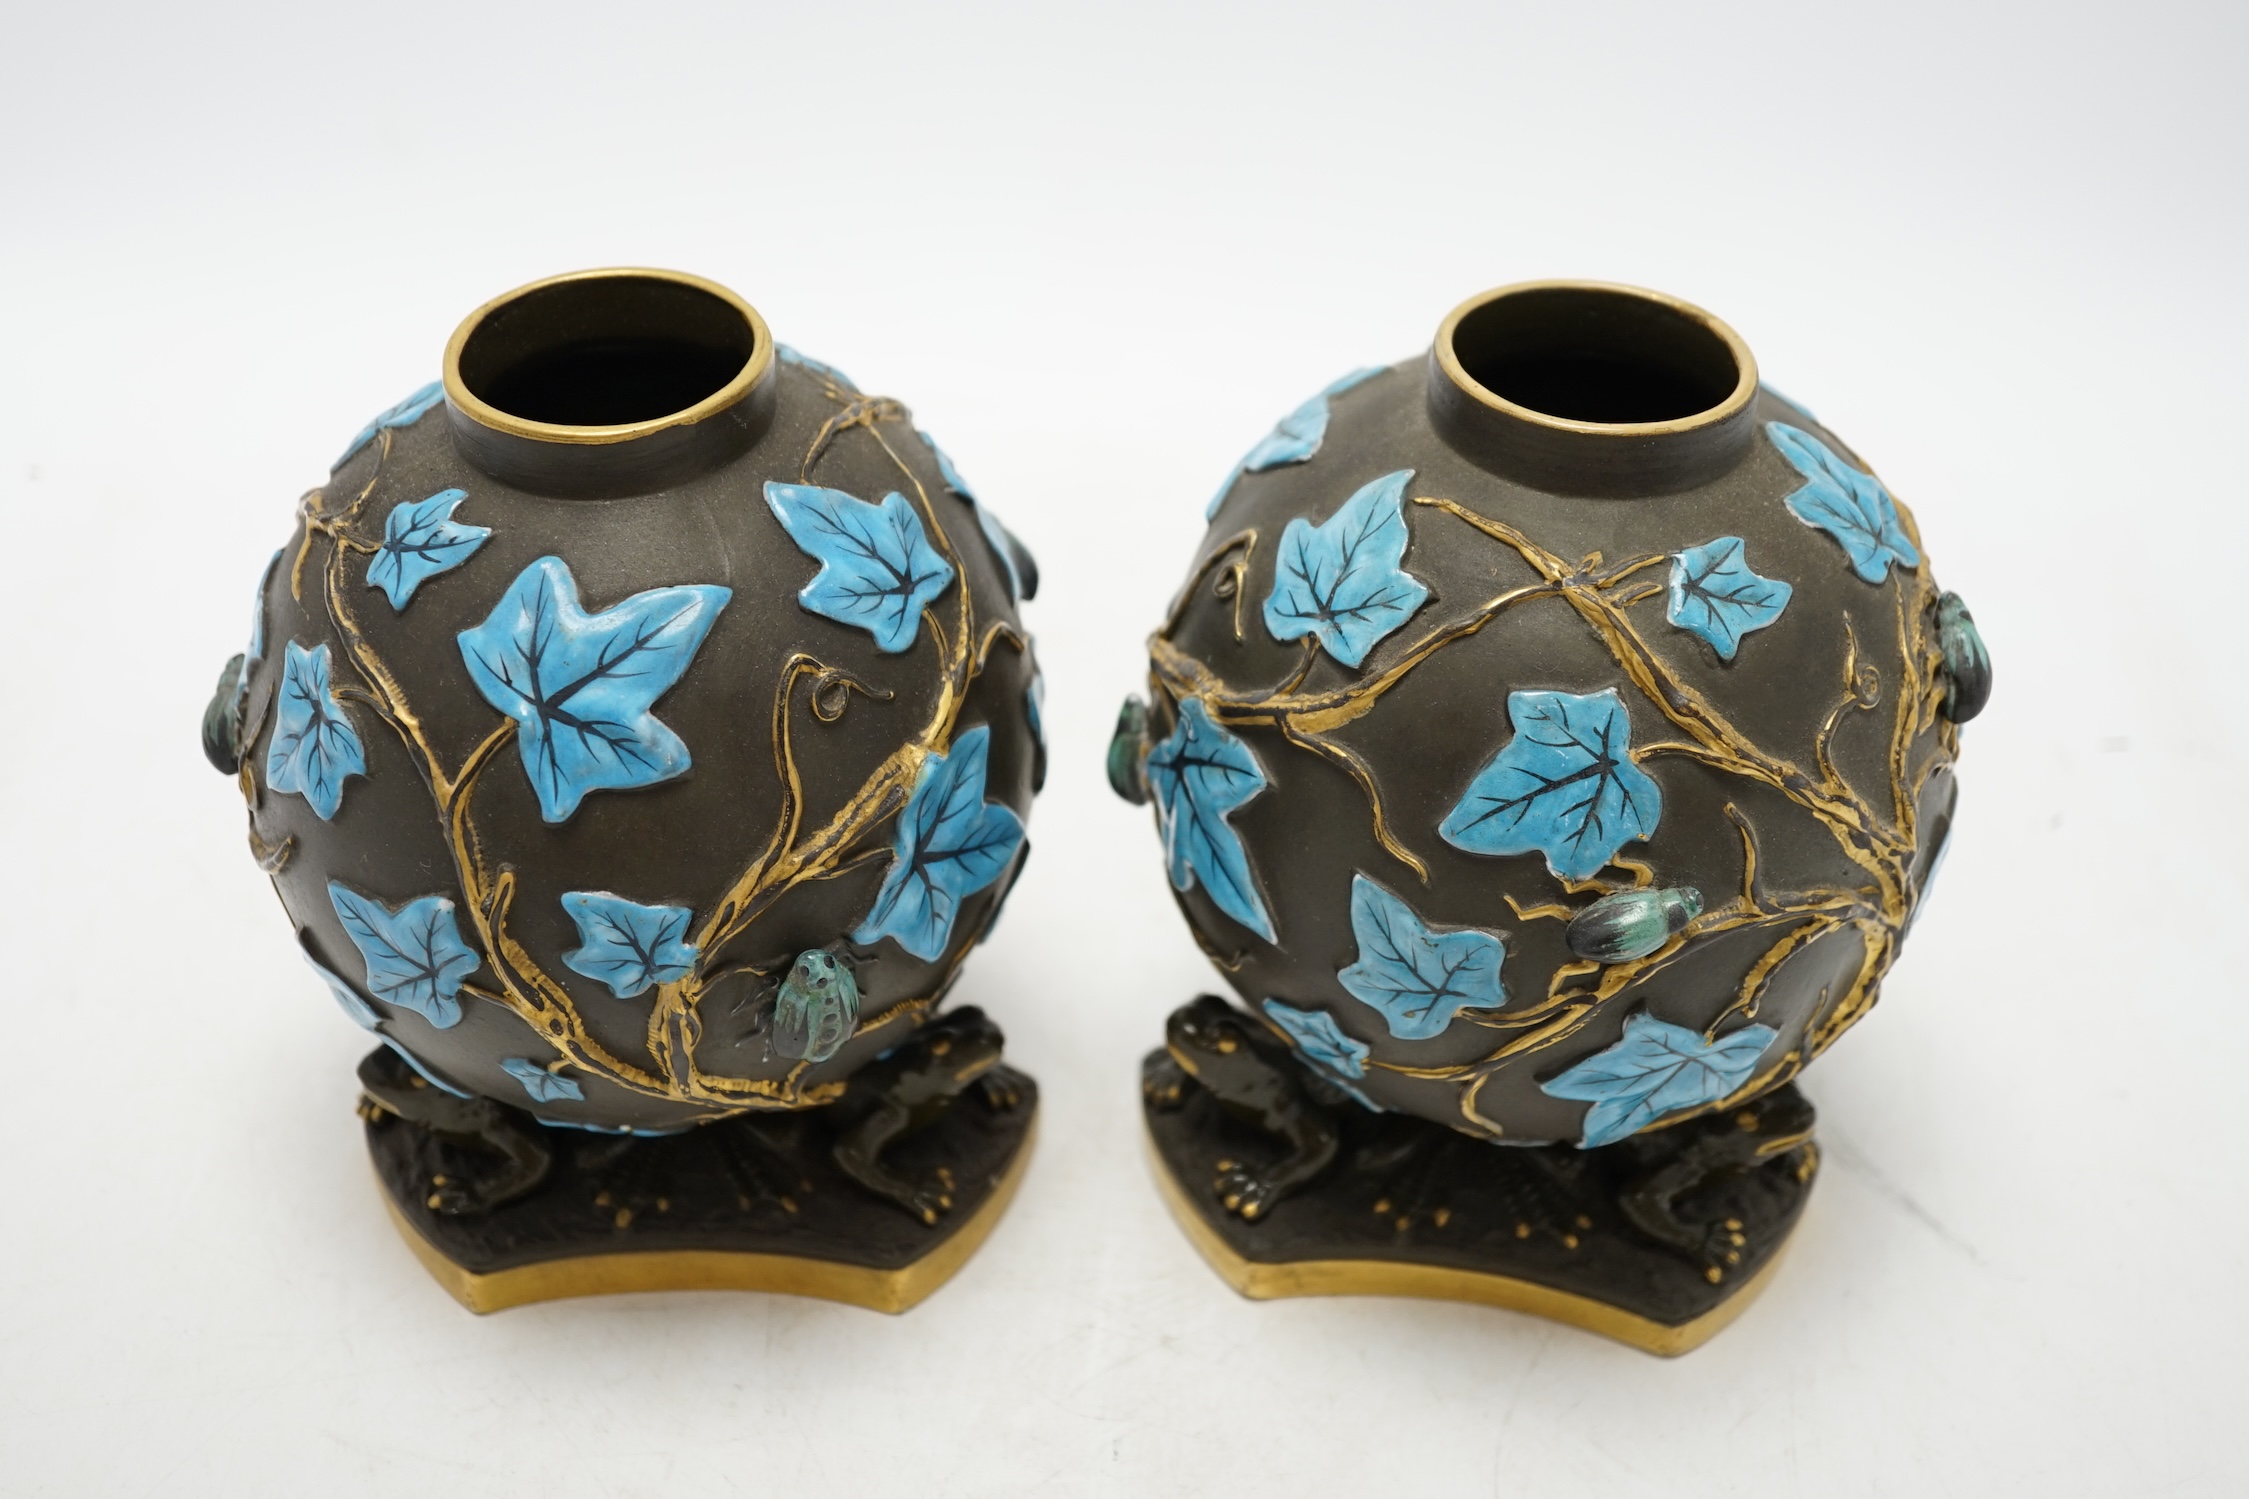 A pair of George Jones Kumassie vases designed by Christopher Dresser, relief moulded designs, frog supports, 14cm. Condition - good